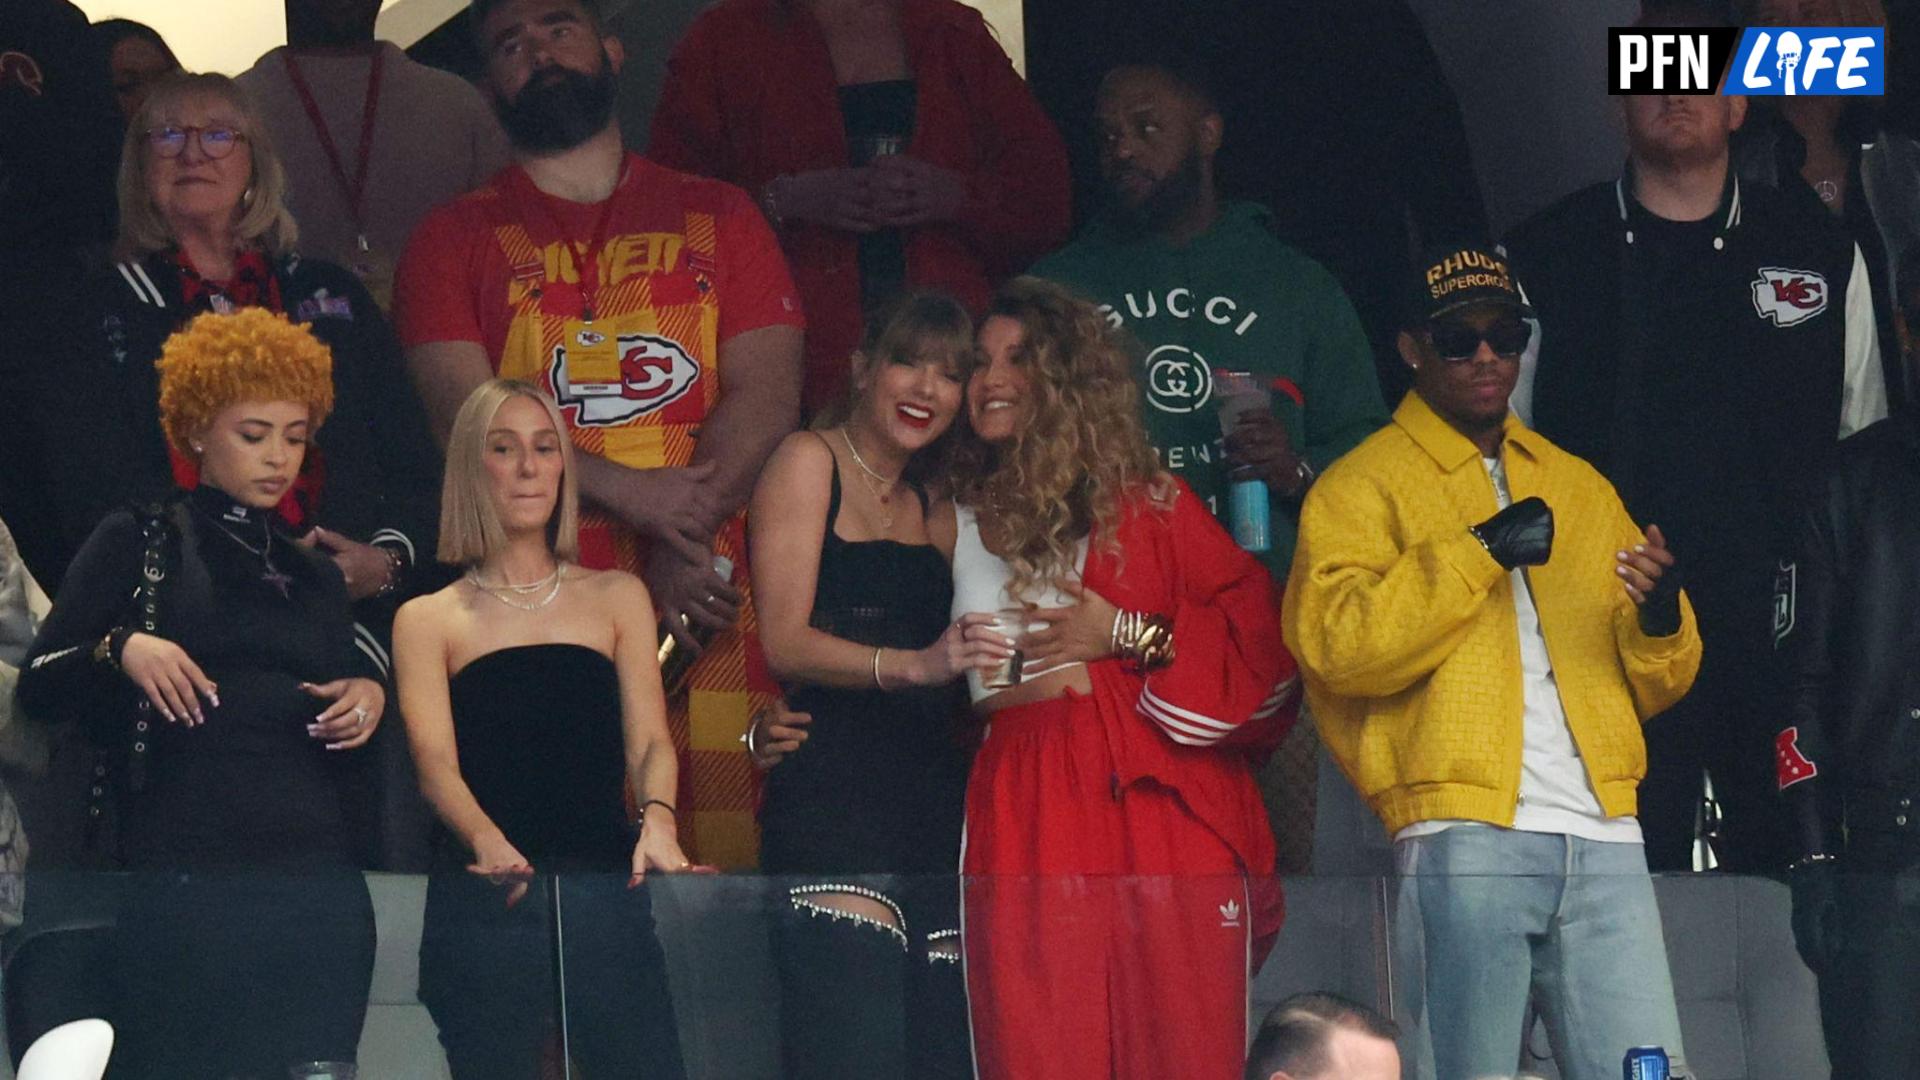 Taylor Swift Earns Praise From Patrick Mahomes for NFL Knowledge and Down -to-Earth Personality